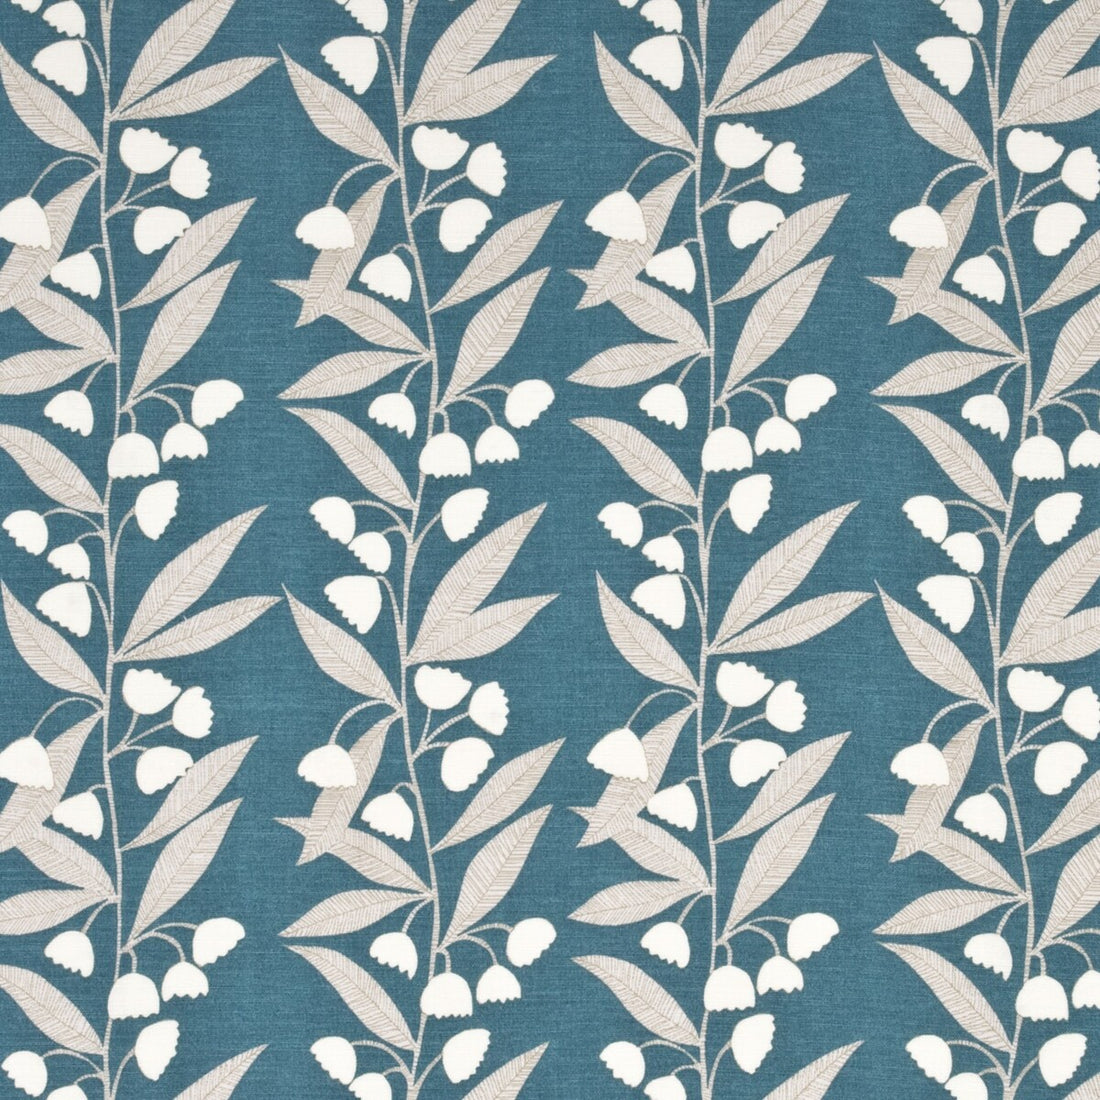 Bell Flower fabric in teal color - pattern PP50361.3.0 - by Baker Lifestyle in the Homes &amp; Gardens II collection